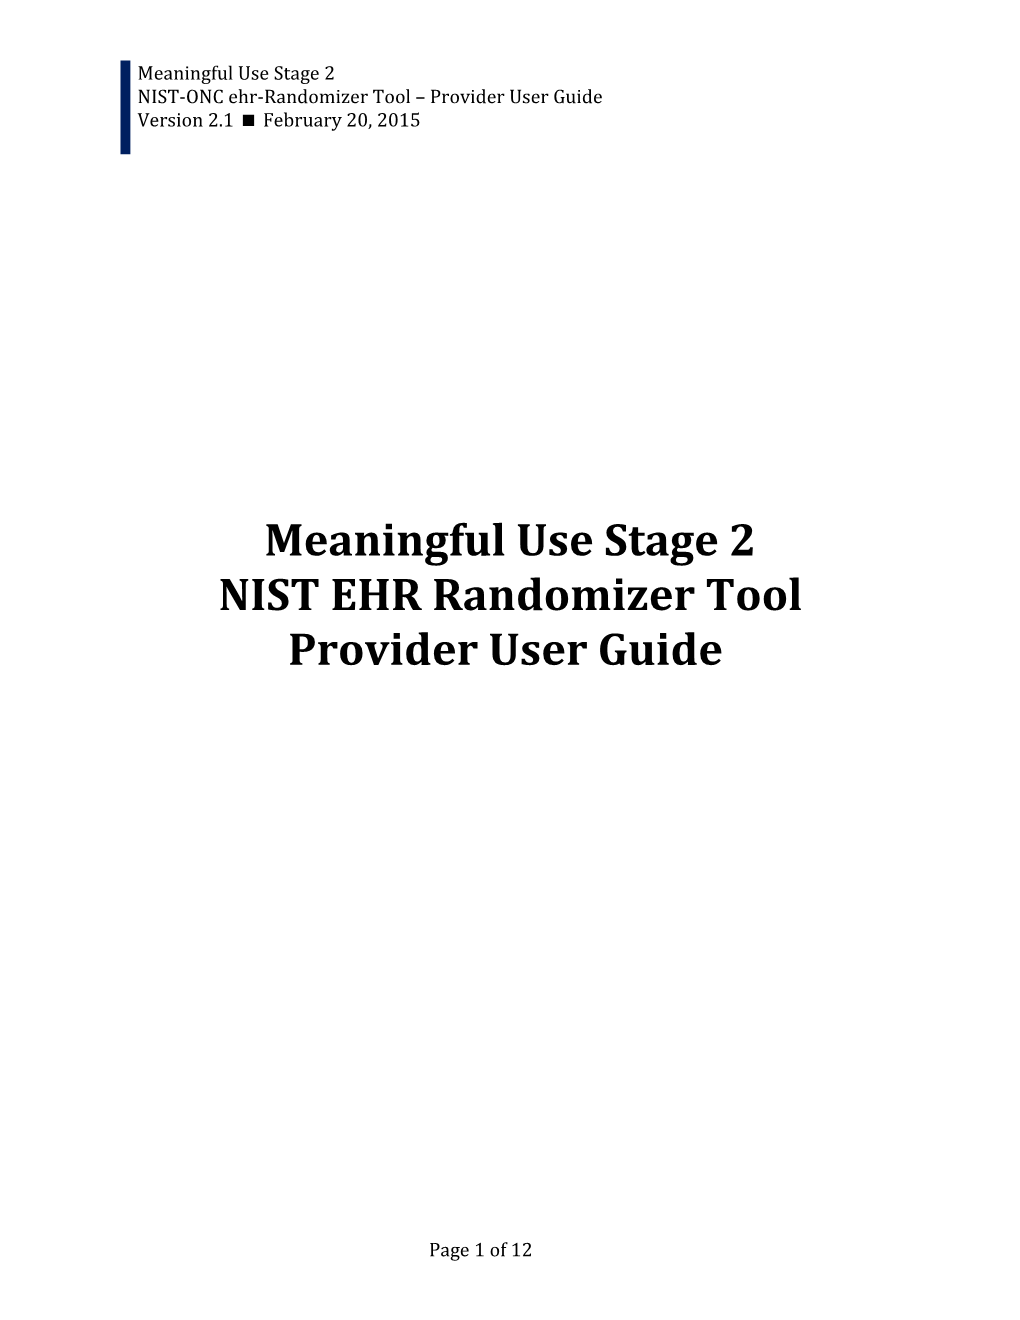 Meaningful Use Stage 2 NIST EHR Randomizer Tool Provider User Guide